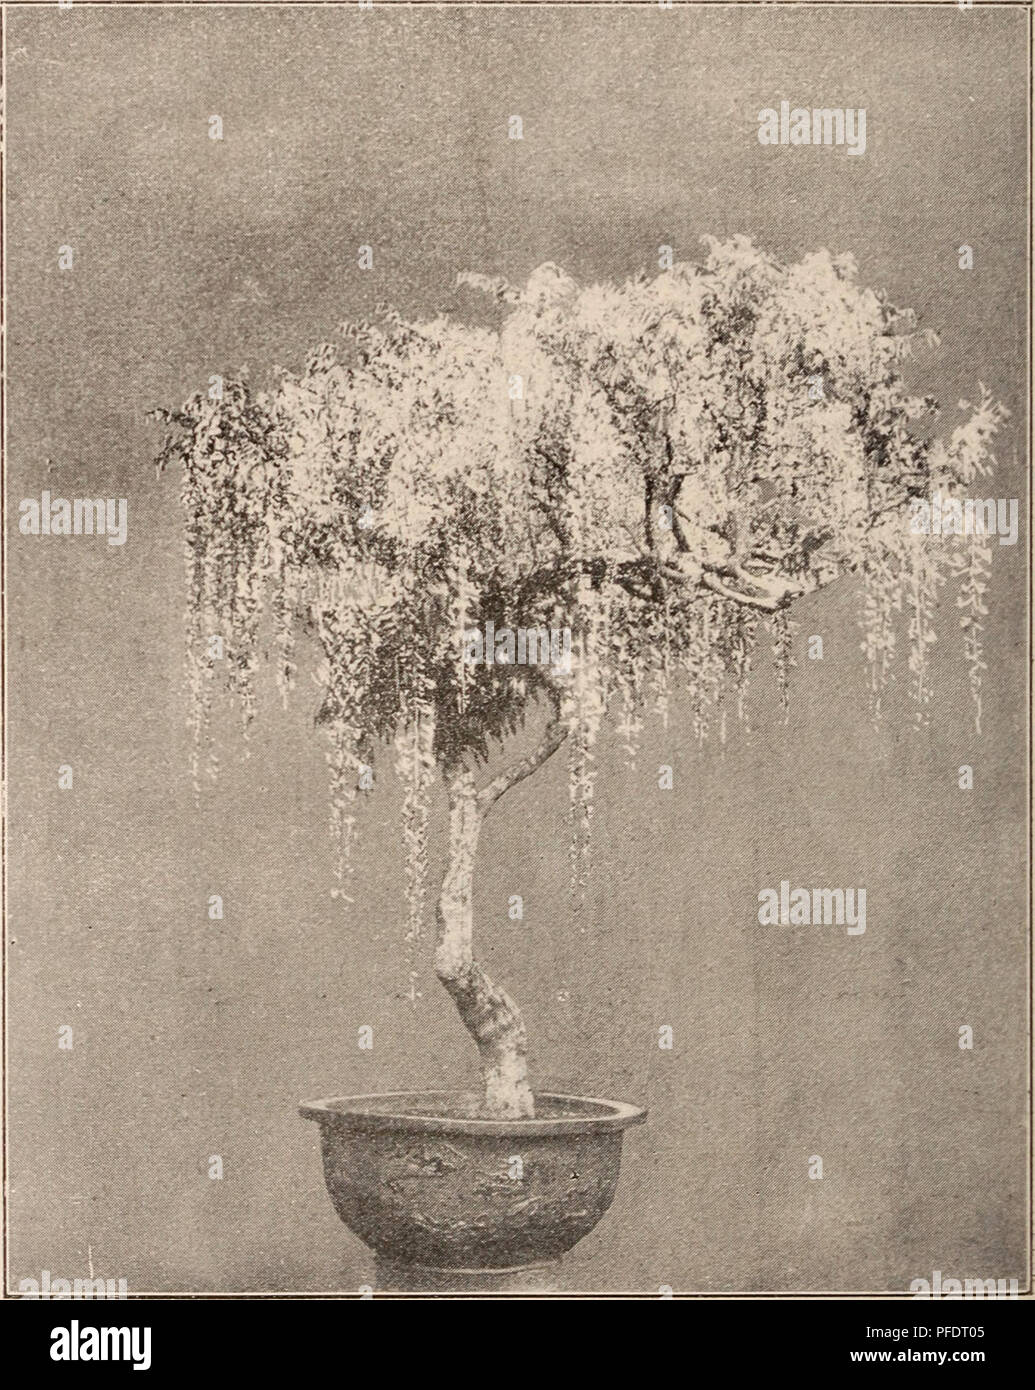 . Descriptive catalogue of flowering, ornamental trees, shrubs, bulbs, herbs, climbers, fruit trees, &amp;c., &amp;c., &amp;c. / for sale by the Yokohama Nursery Co., Limited.. Nursery Catalogue. ,sii;)irriA ukifi.oea, Hediim Slet)oldi, pemmiiil clustered pink flowers, very fine, J inch across suitable for hano iug baskets—per 10, $1.31). S a radicans, pretty alpine plant belonging to Saxifraga familv—per 10 $1.00. Therniopsis fabaeea, sho^^y y e 11 o w p a i 1 i o naceous flv)wer, ornamental per- ennial—per 10, $1.30. Tricyrtis Japonica, av h i t e flower spotted a ith purple —per 10, $1.00. Stock Photo